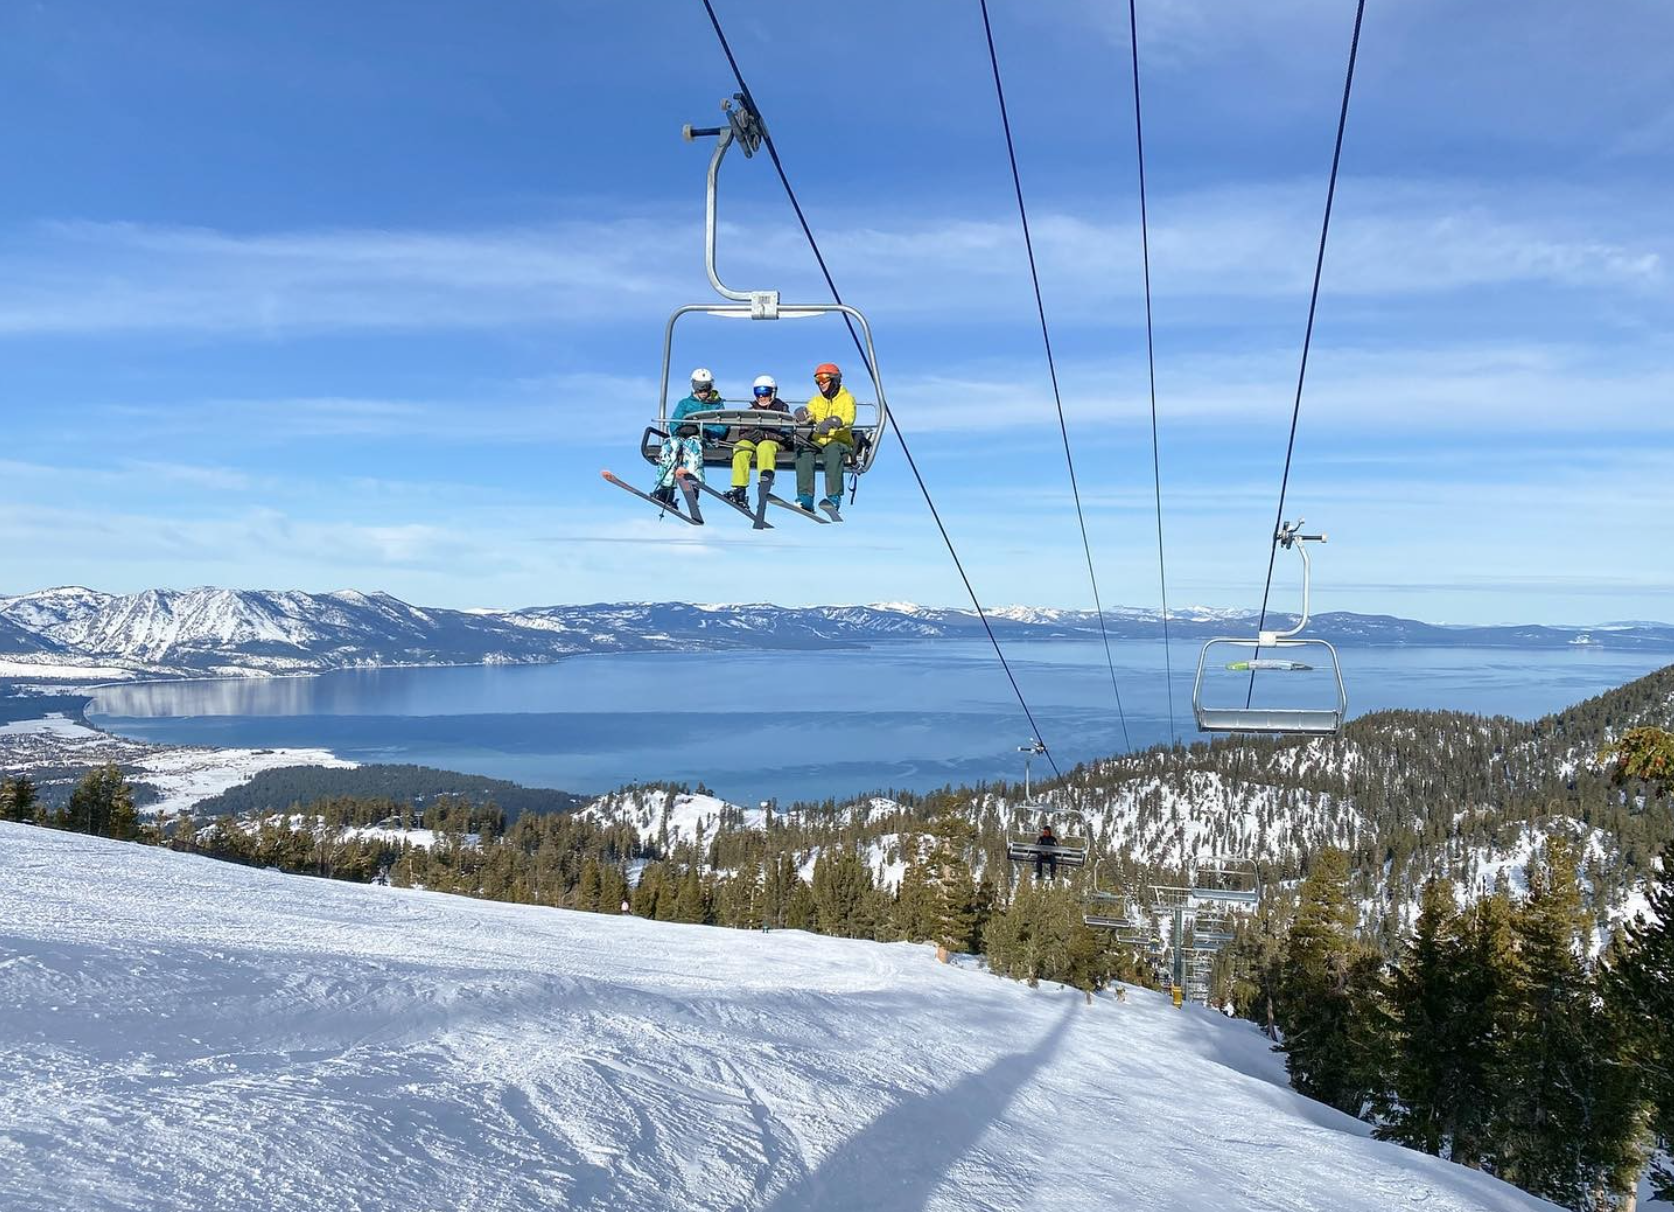 Vail Resorts Offers $13.1 Million to Settle Class Action Lawsuits Filed By Employees